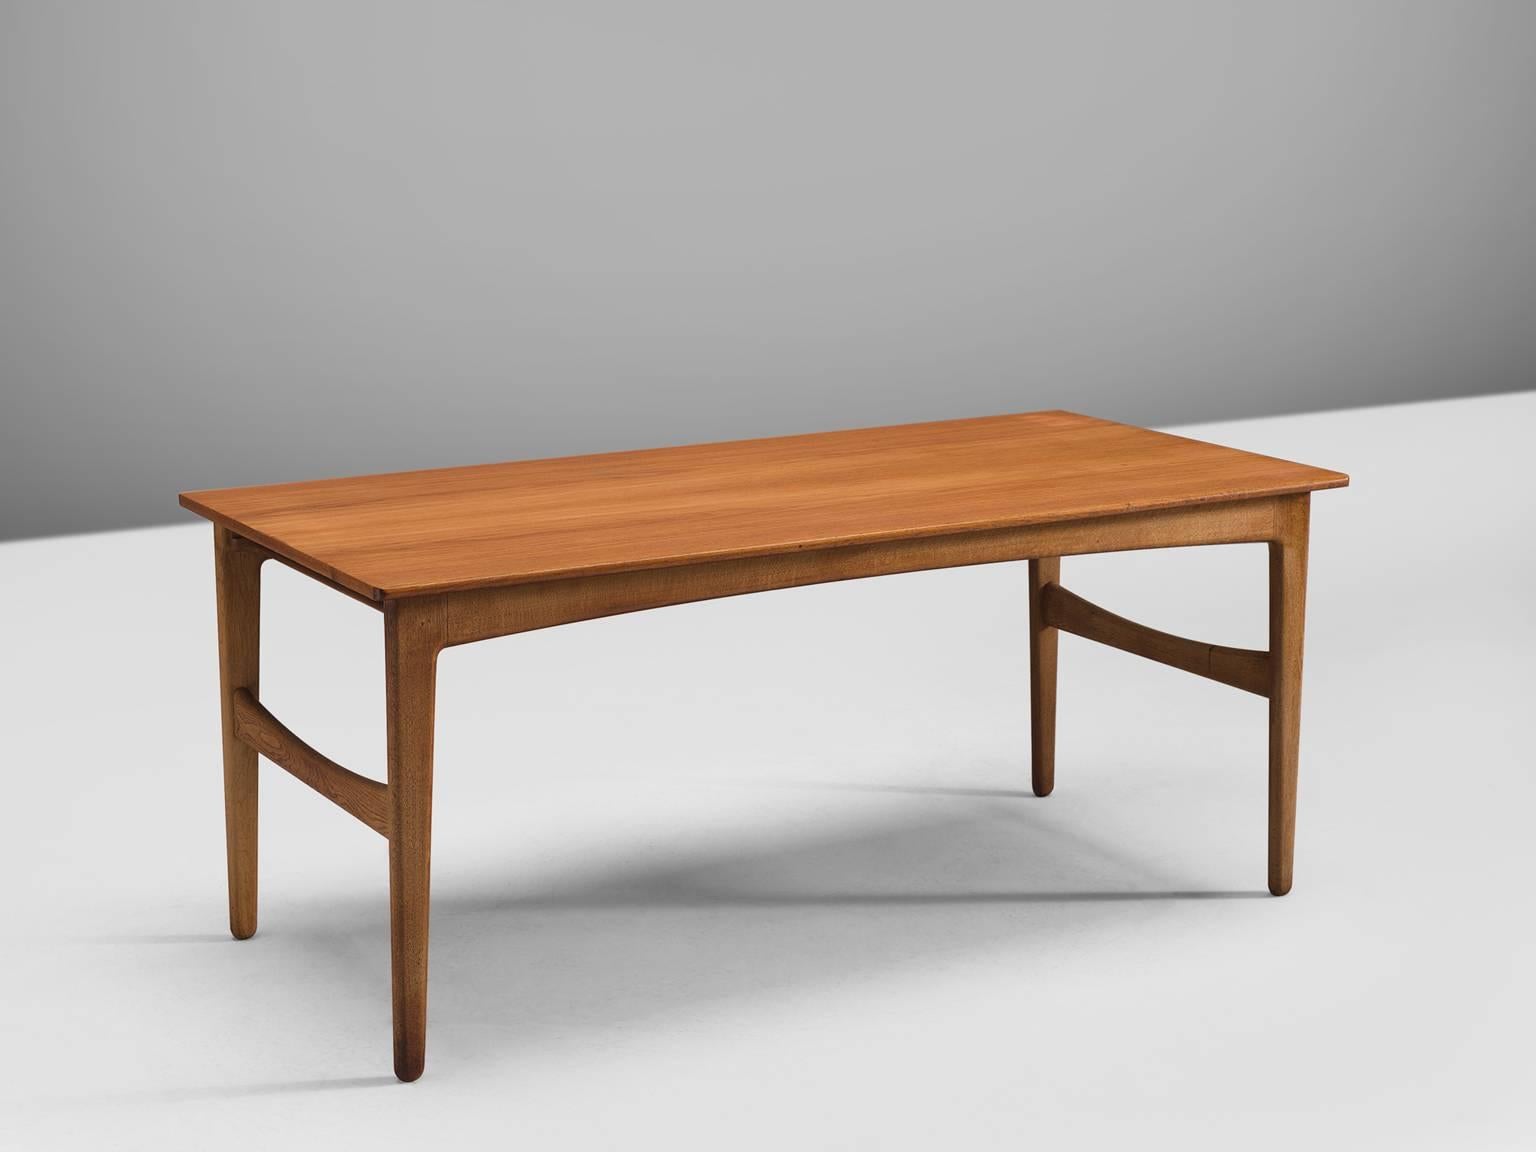 Dining or kitchen table, teak and oak, Denmark, 1950s

This table is executed with a teak top and a an oak frame. The table can seat four people and could also be the perfect piece to use as either a writing or kitchen table. The grain and flames in